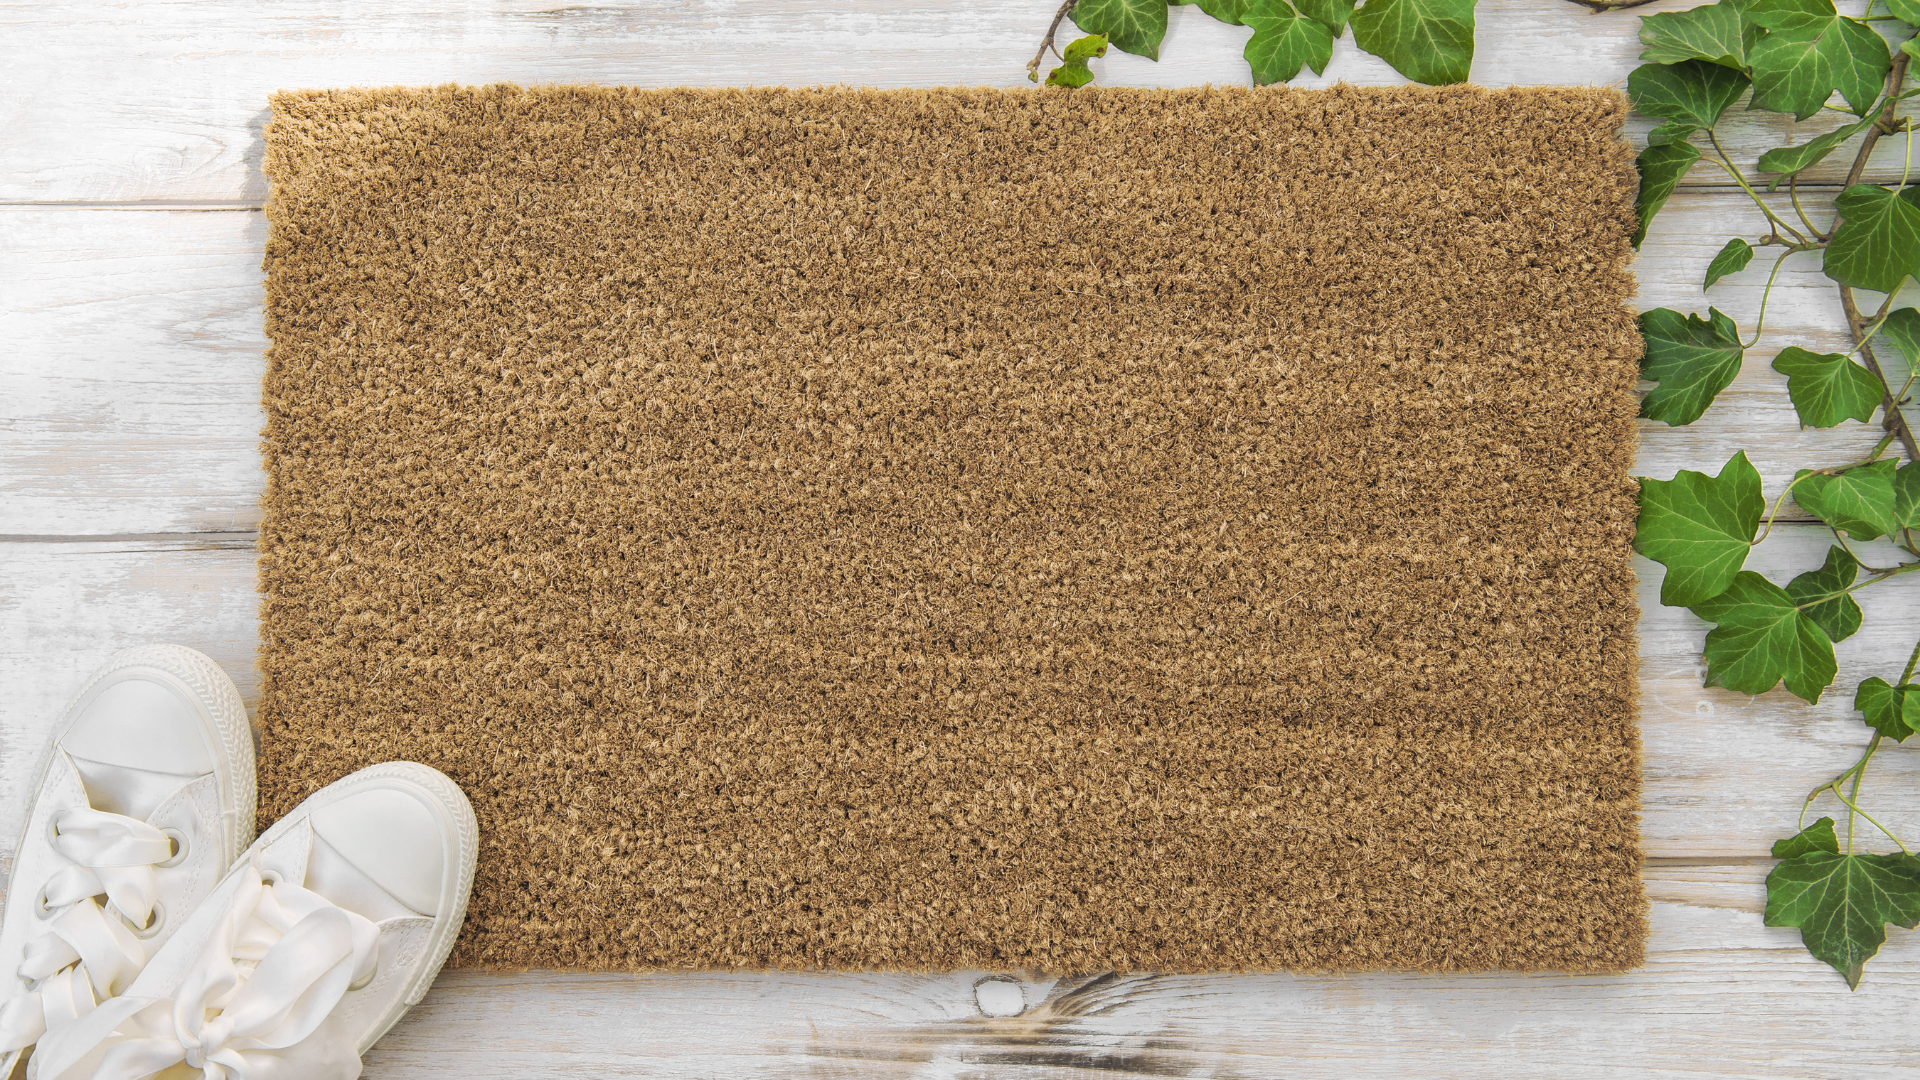 Coir Mat Products for Erosion Control